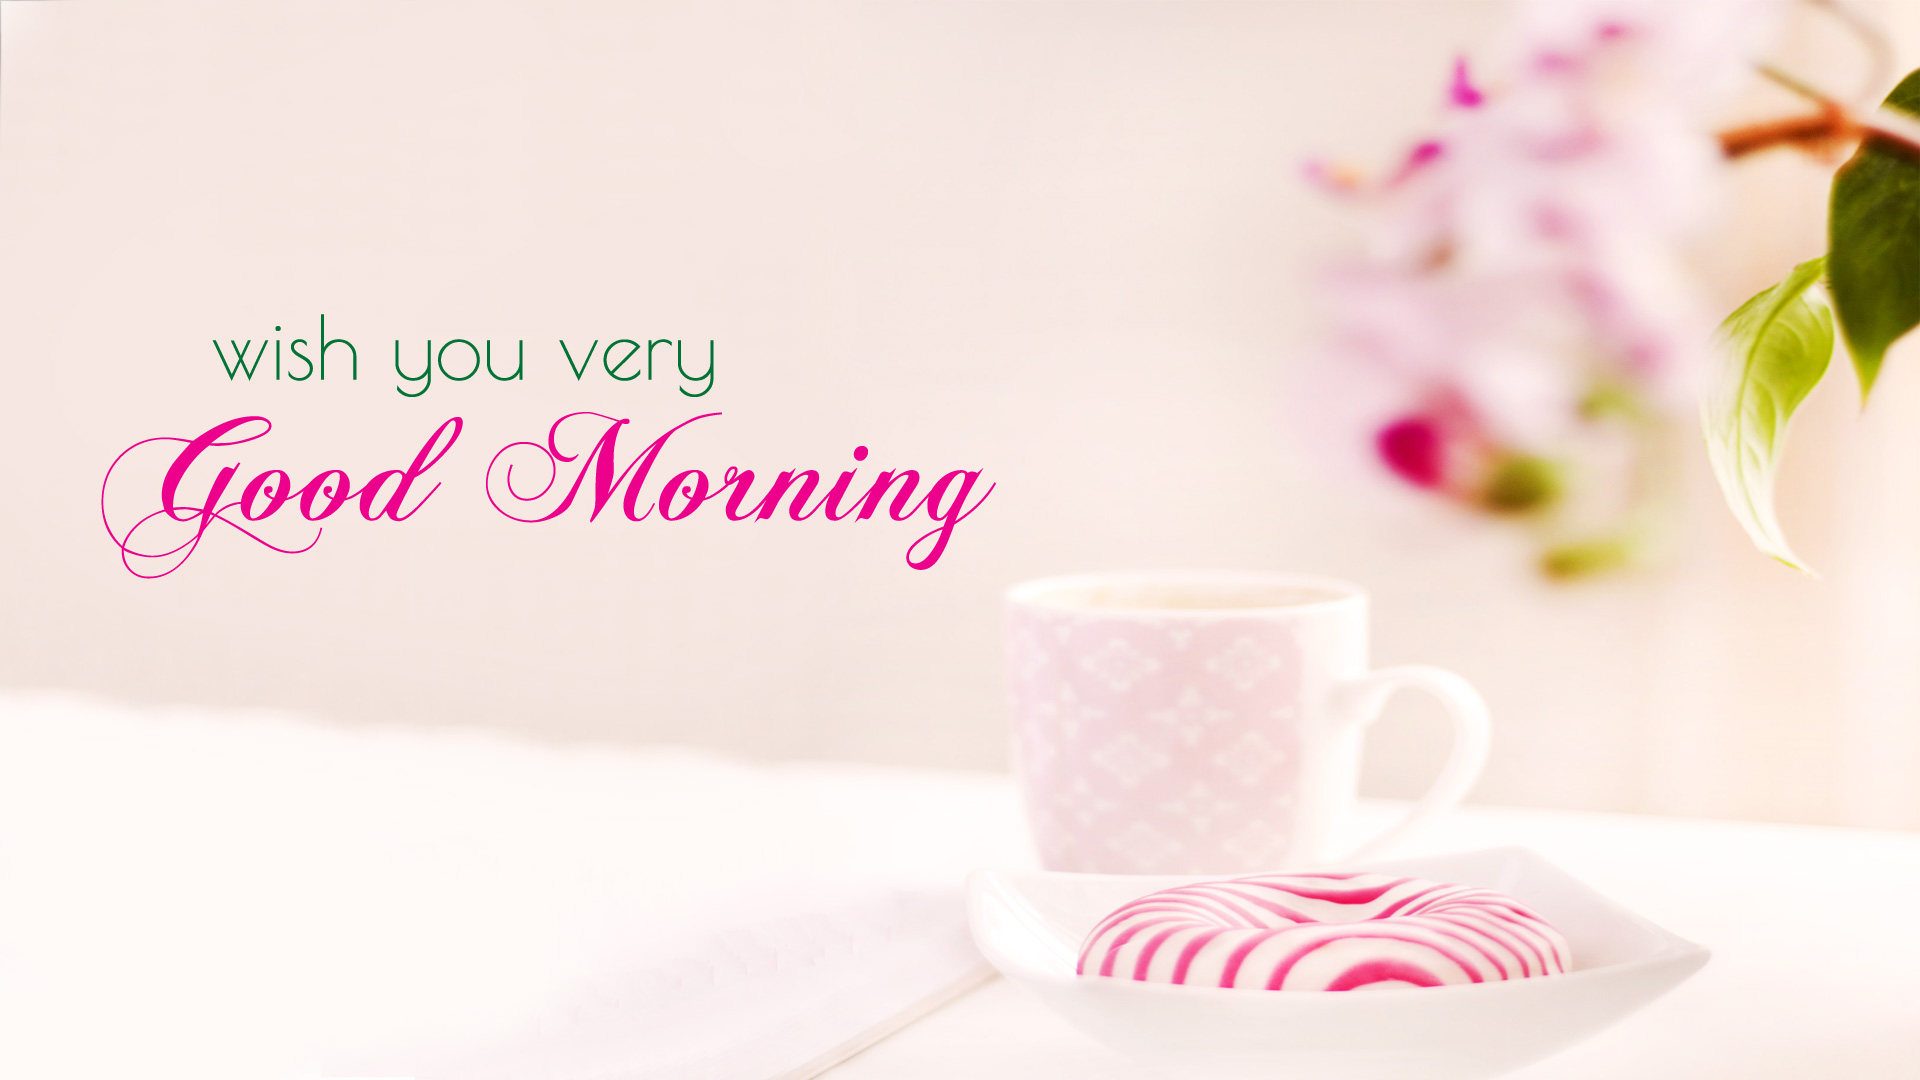 Good Morning Wishes Wallpaper - Morning Wishes Good Morning Quotes For Friend - HD Wallpaper 